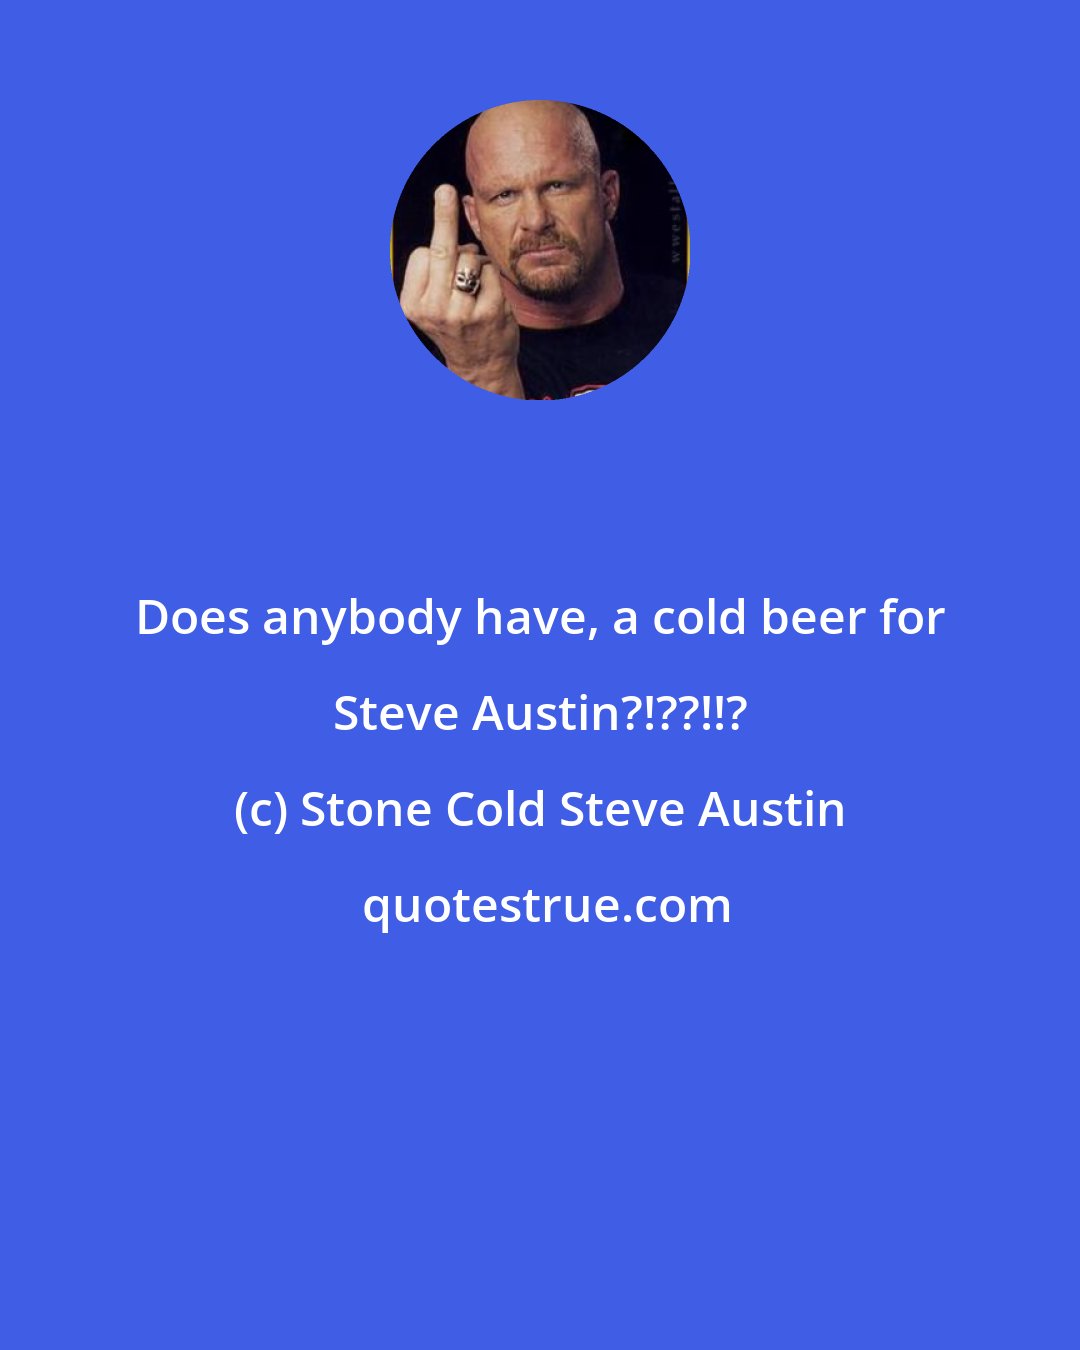 Stone Cold Steve Austin: Does anybody have, a cold beer for Steve Austin?!??!!?